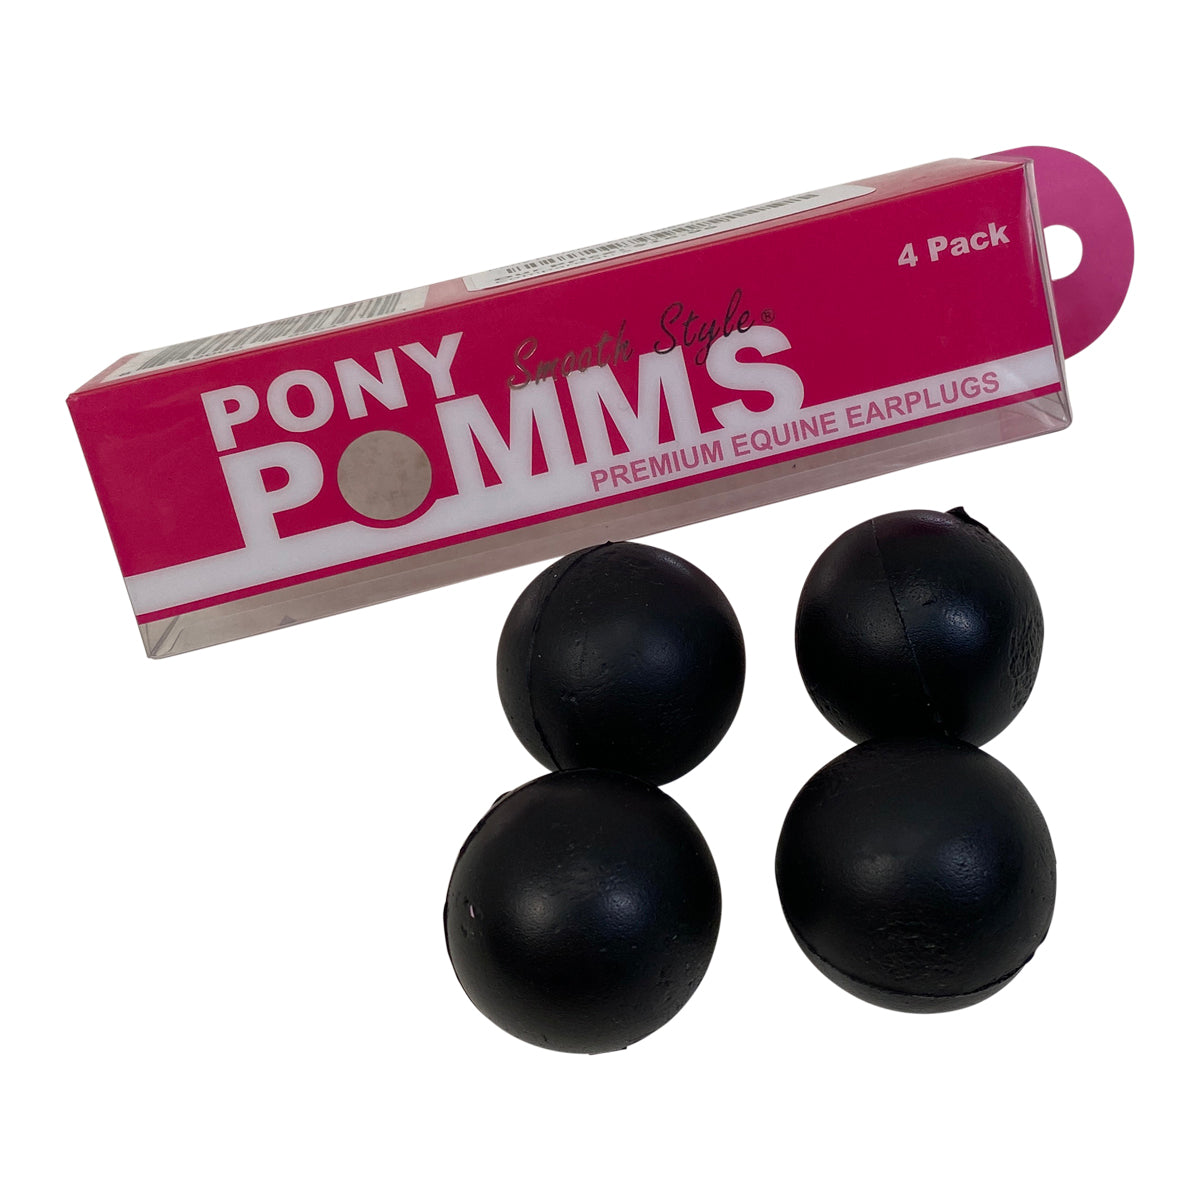 Pony POMMS 'Smooth' Ear Plugs in Black